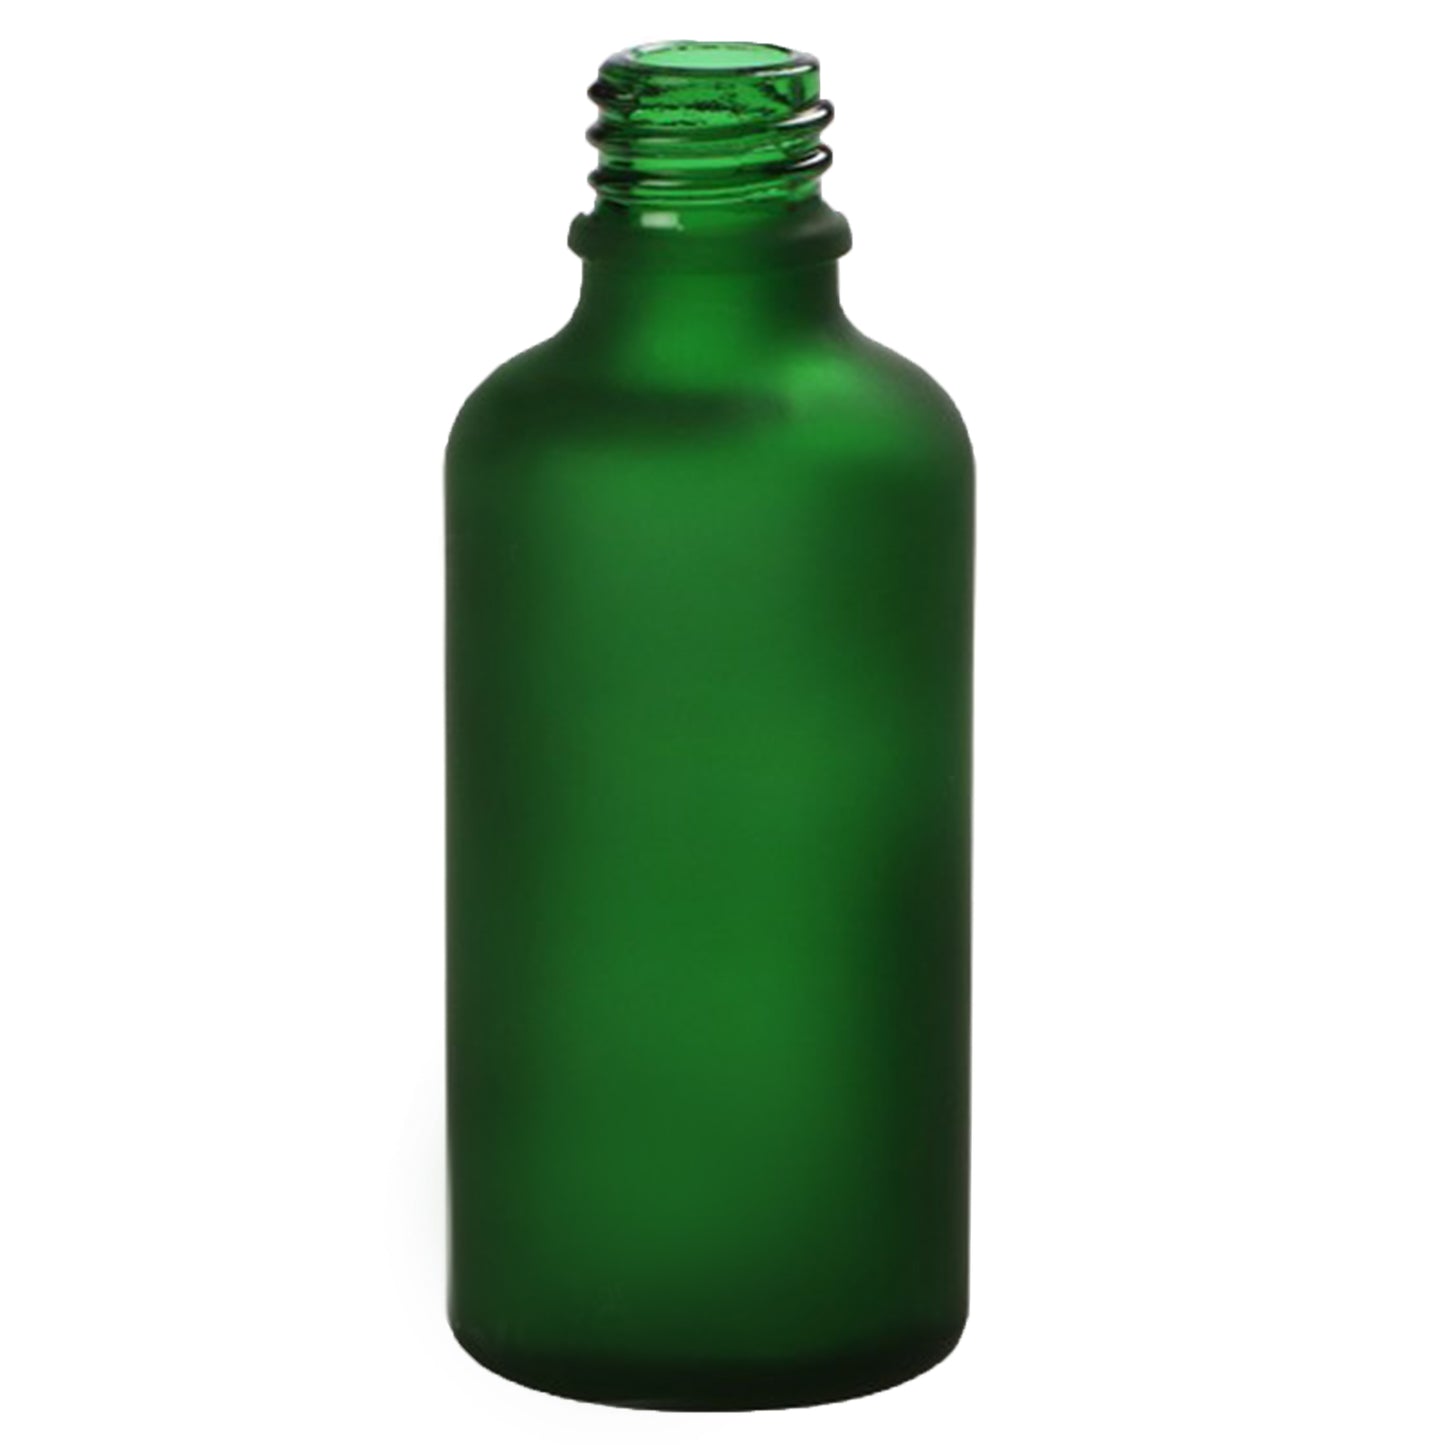 50ml Frosted Green Bottles